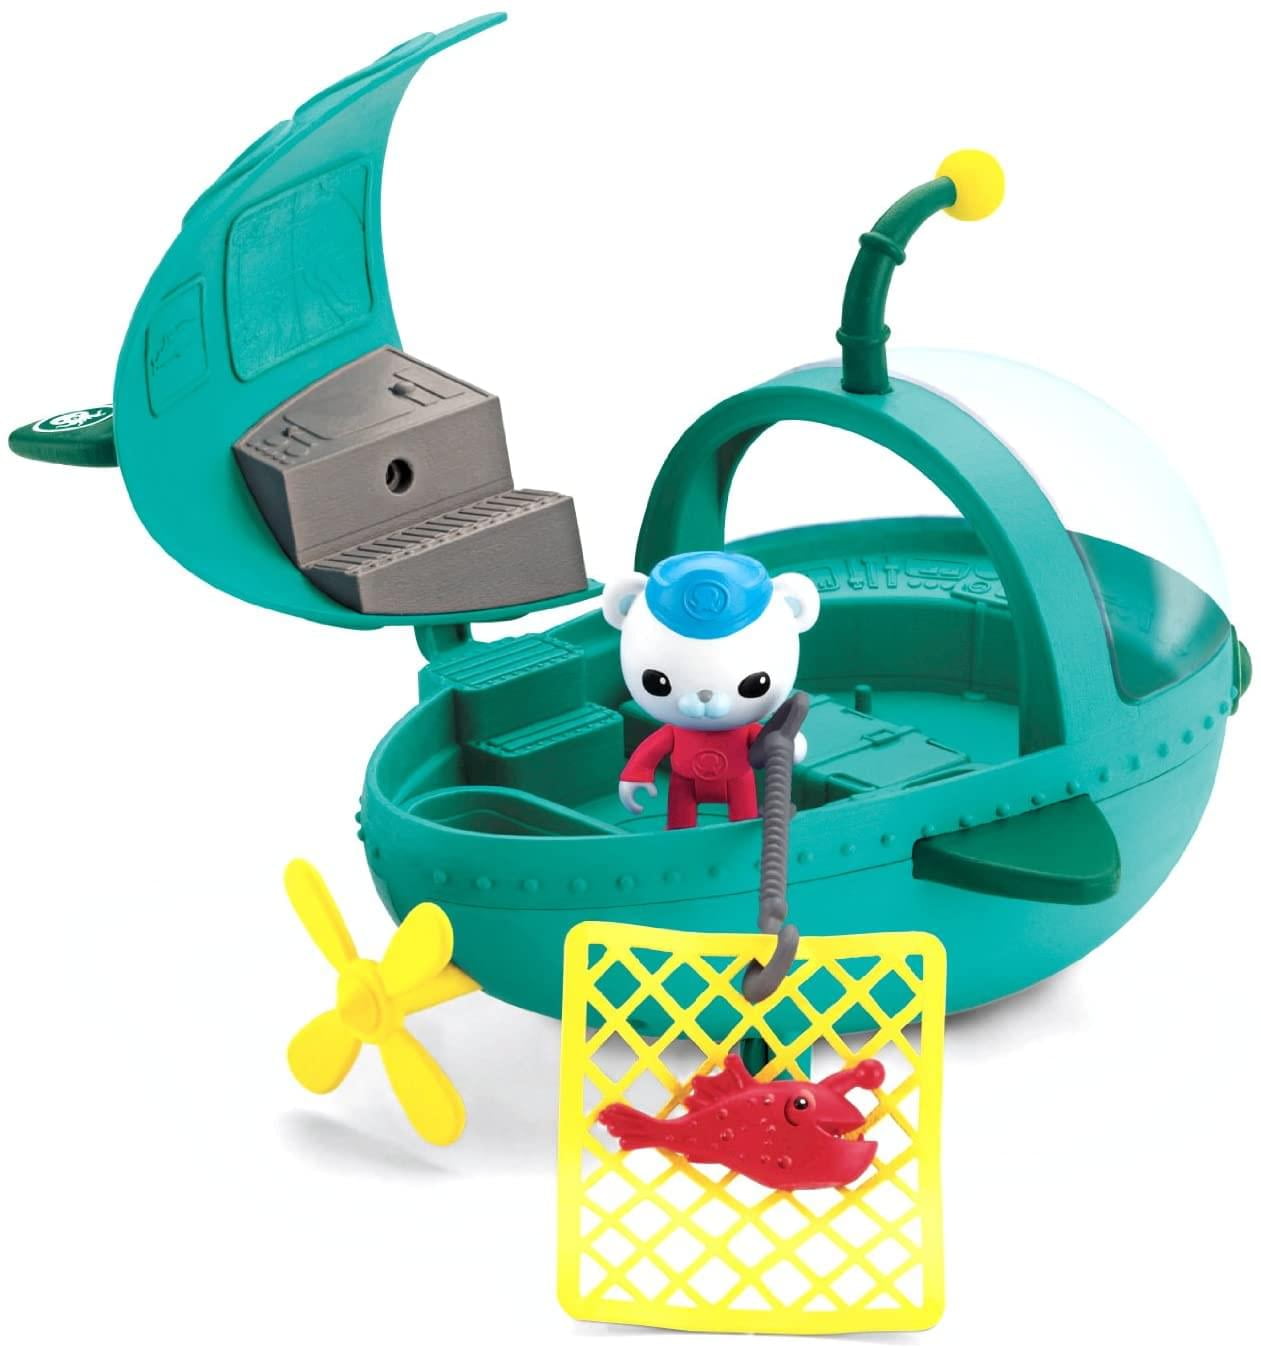 Inkling & The Seahorse Creature Pack & 3 Glow in the dark Articulated Figures GUP Speeder Q Includes GUP M & Kwazi Playset Fisher Price The Octonauts 6 Piece Gift Set